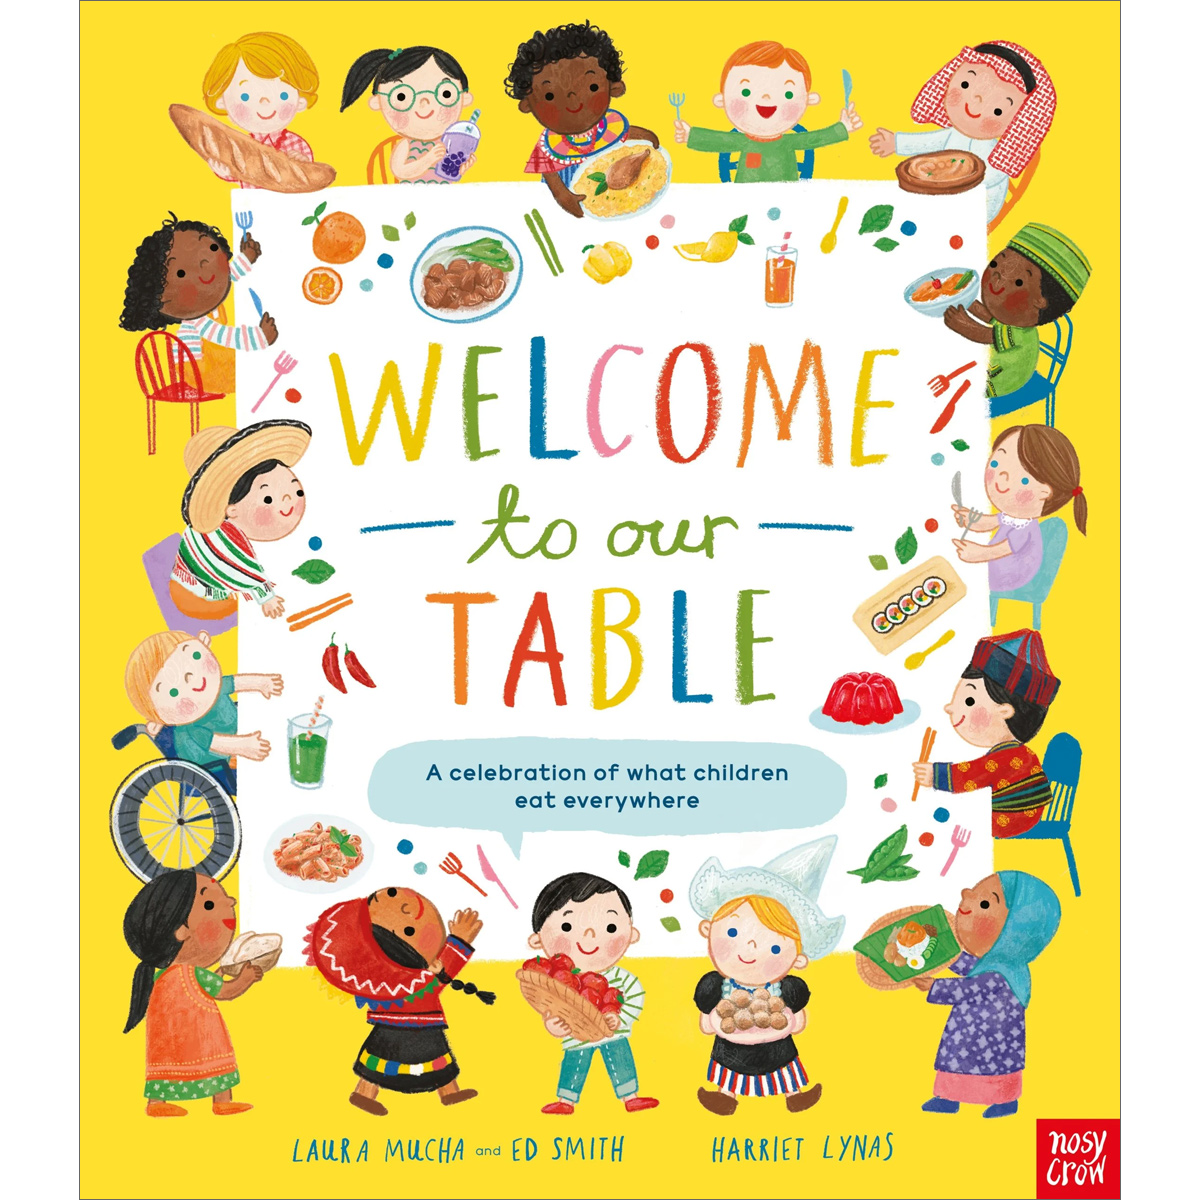 Welcome to our Table - A celebration of what children eat everywhere